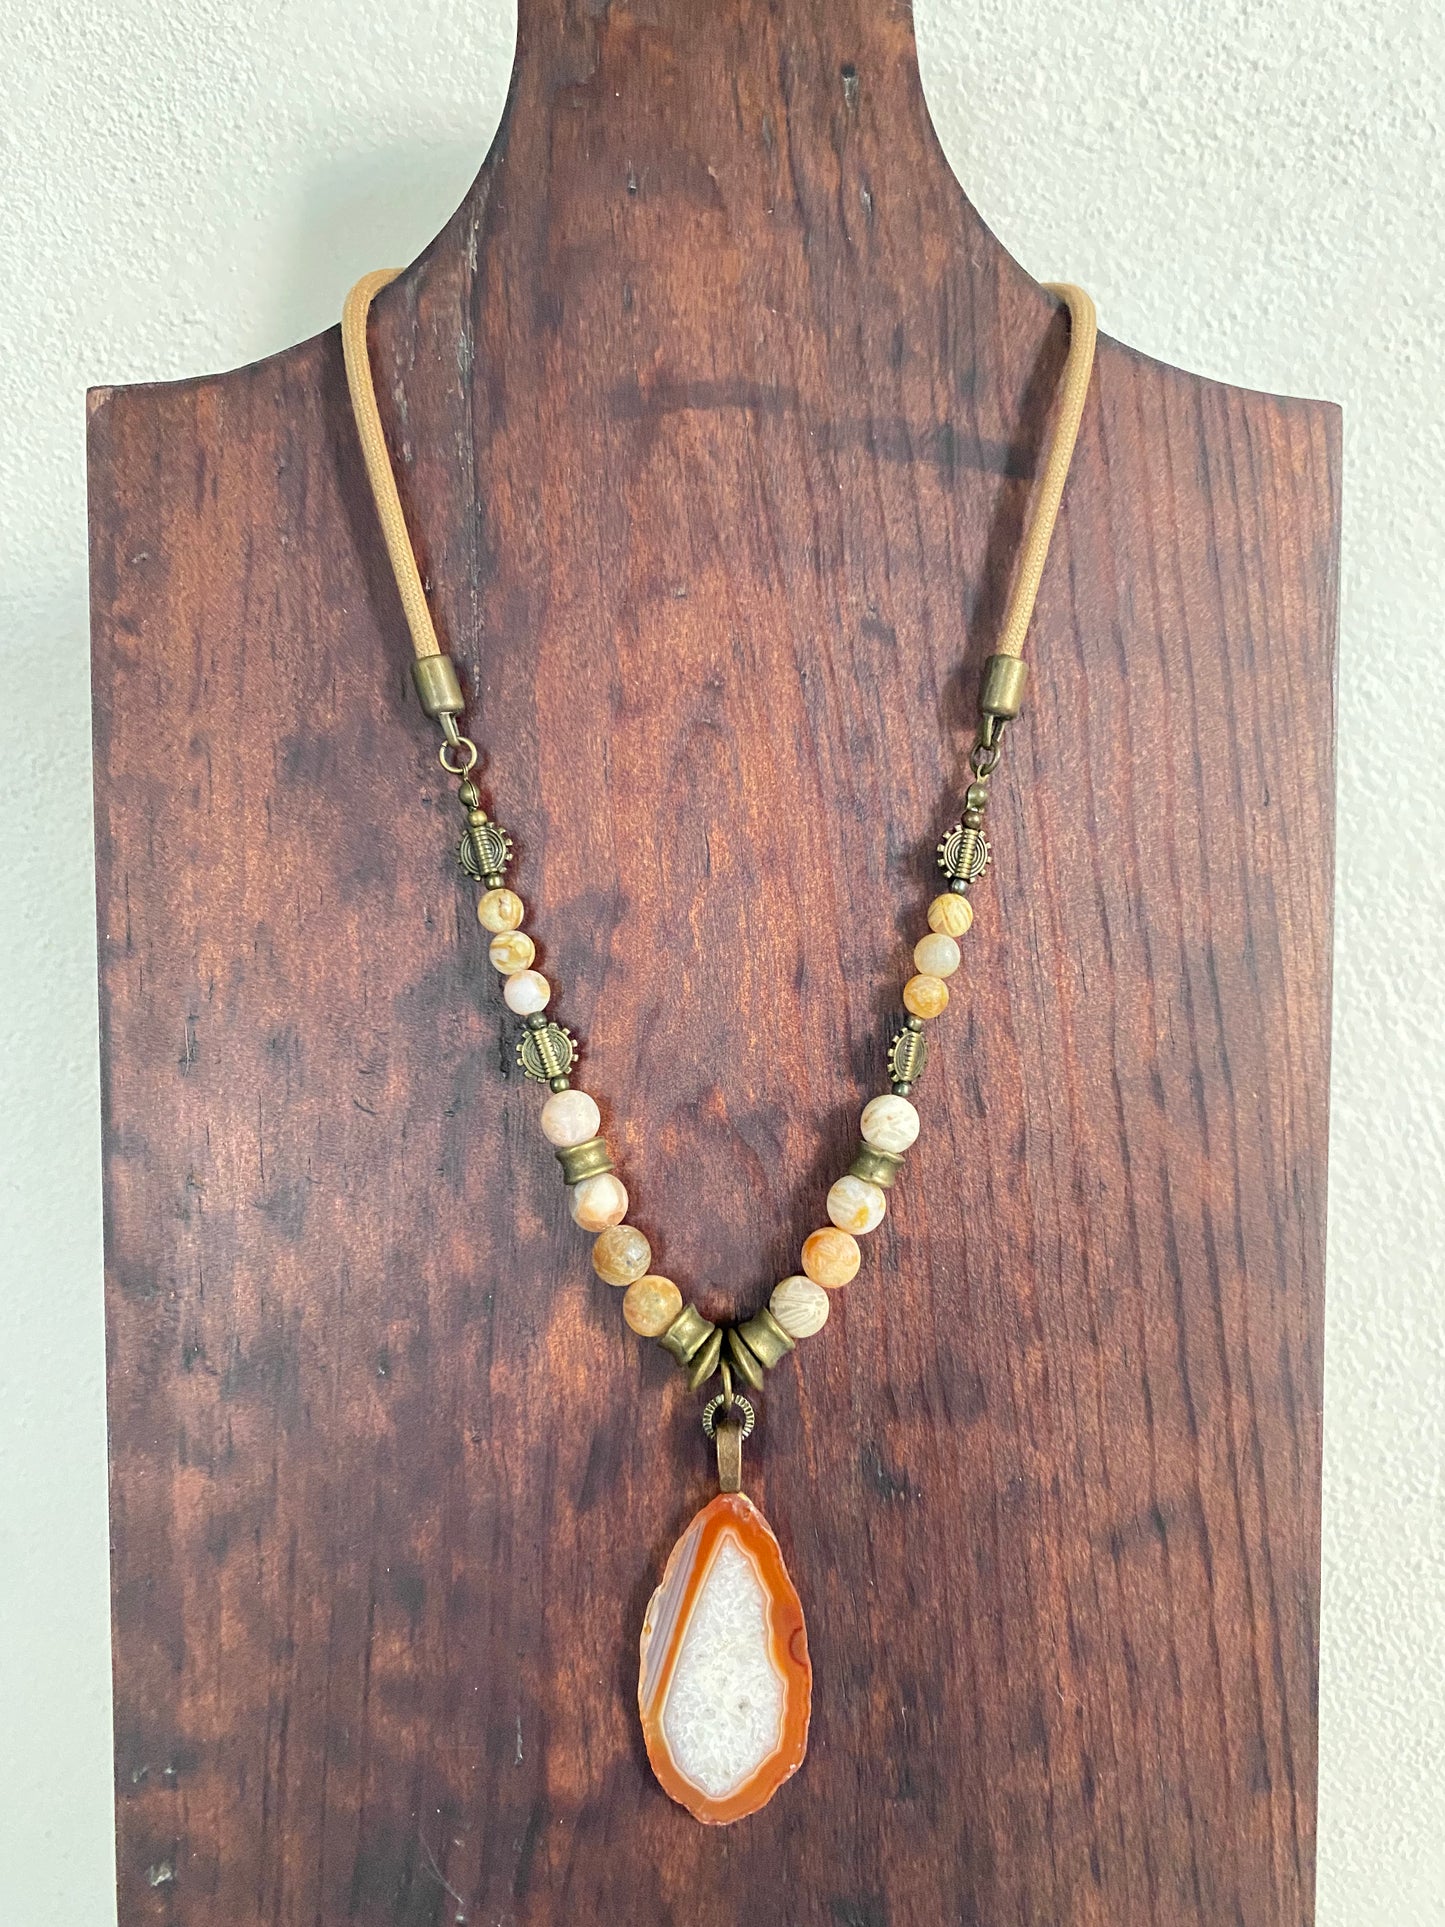 Japanese Agate Necklace